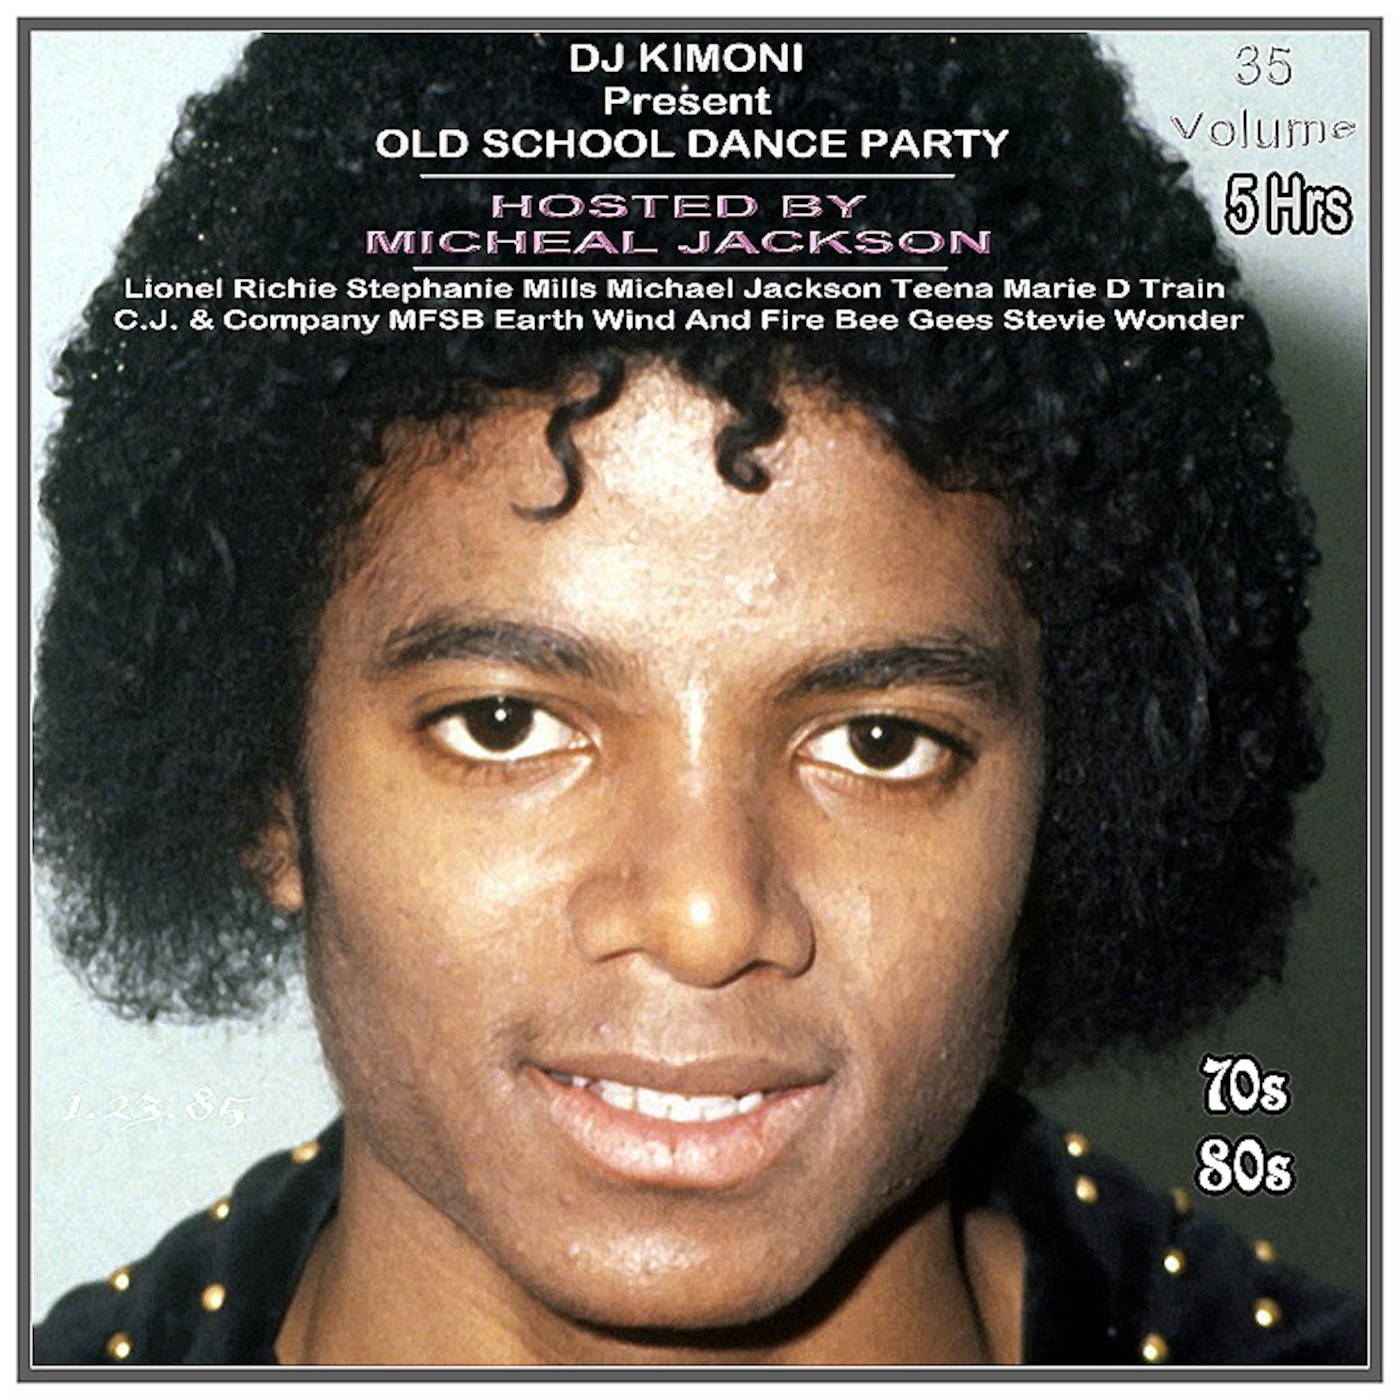 Dj Kimoni JUST CLASSIC Dance, House & RnB (70's 80's) Hosted by Micheal Jackson Volume 35 (1 DVD) 1-19-15